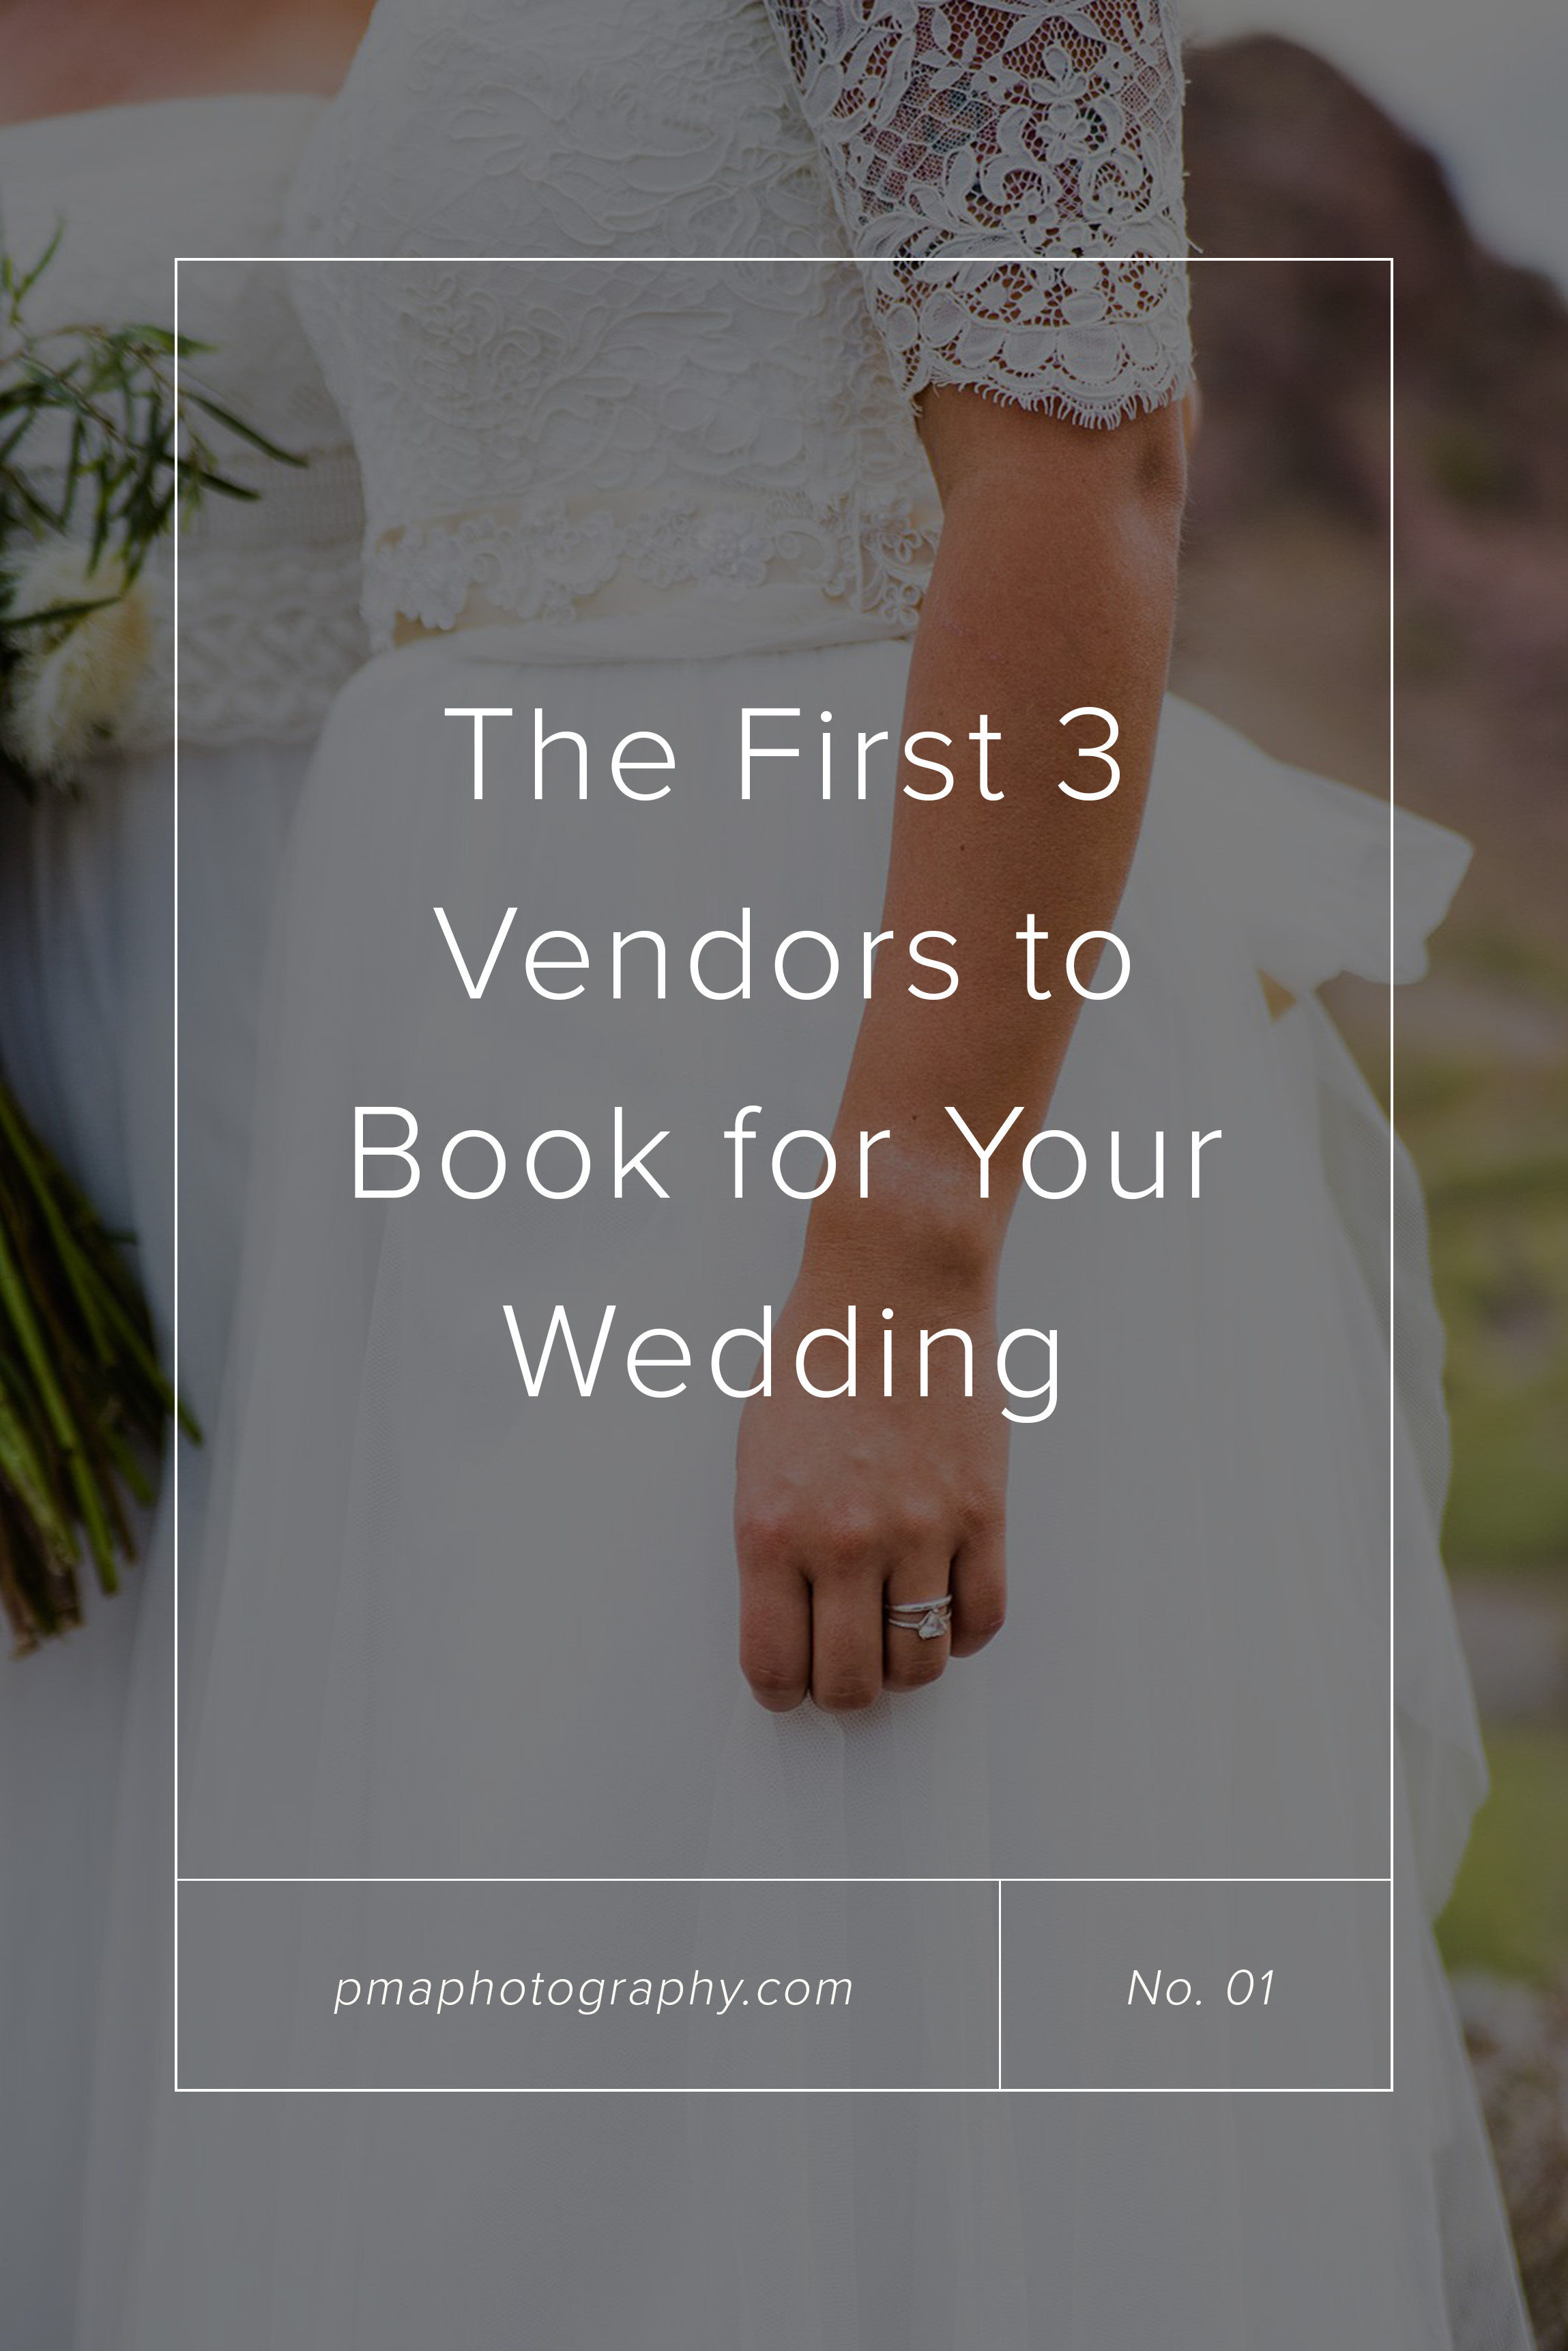 The first three vendors to book for your wedding by Amber of PMA Photography.